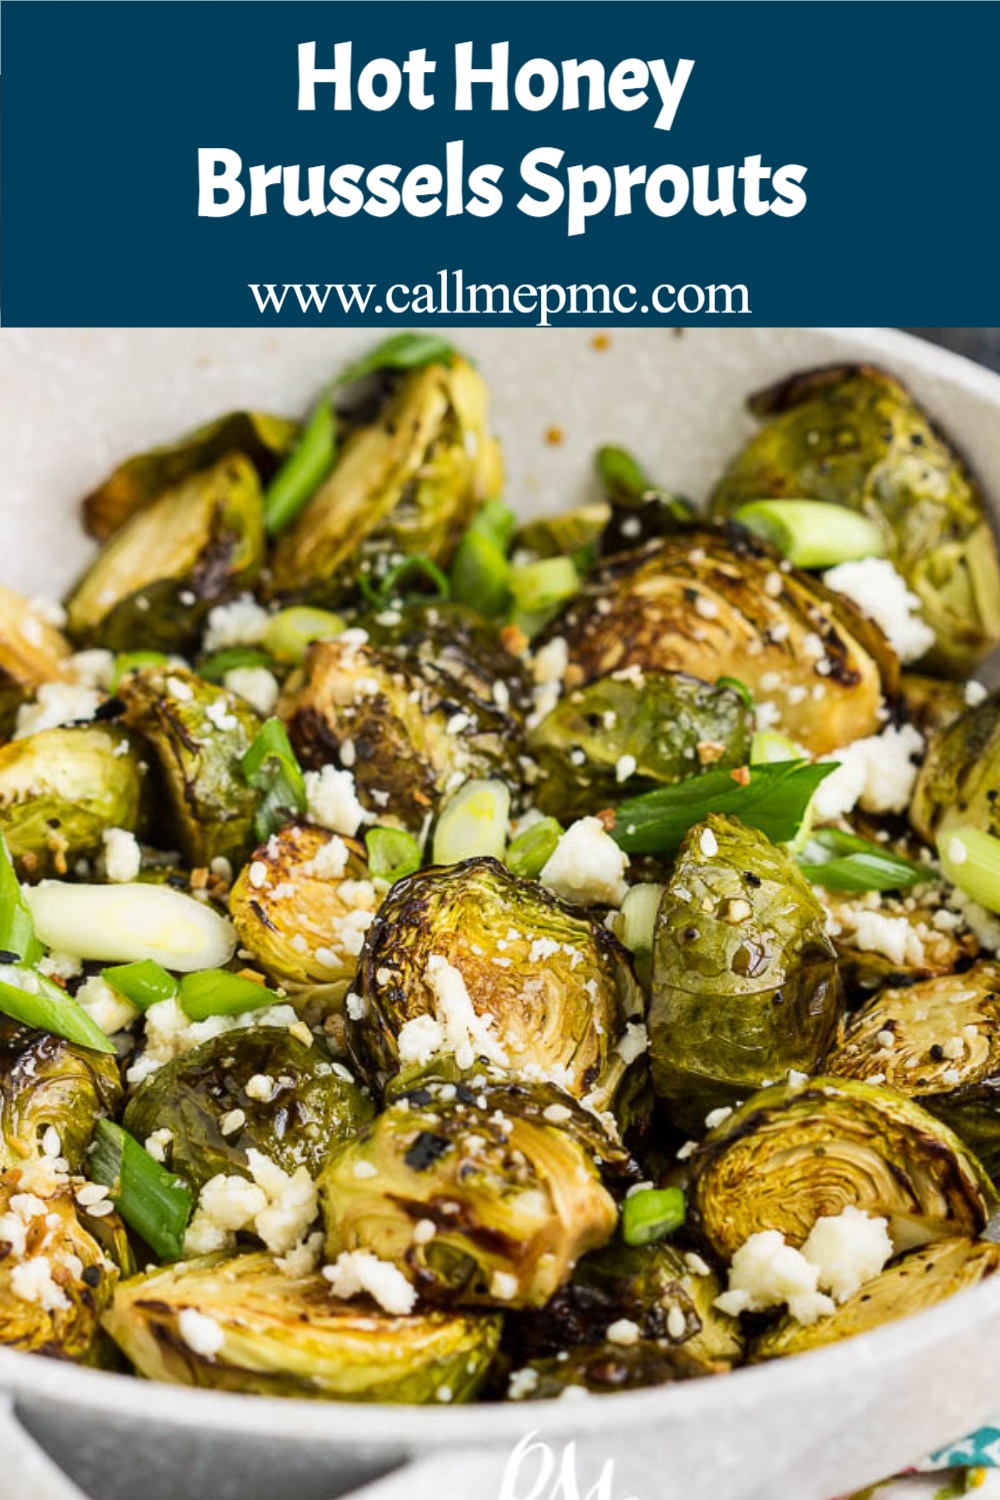 Hot Honey Brussels Sprouts 